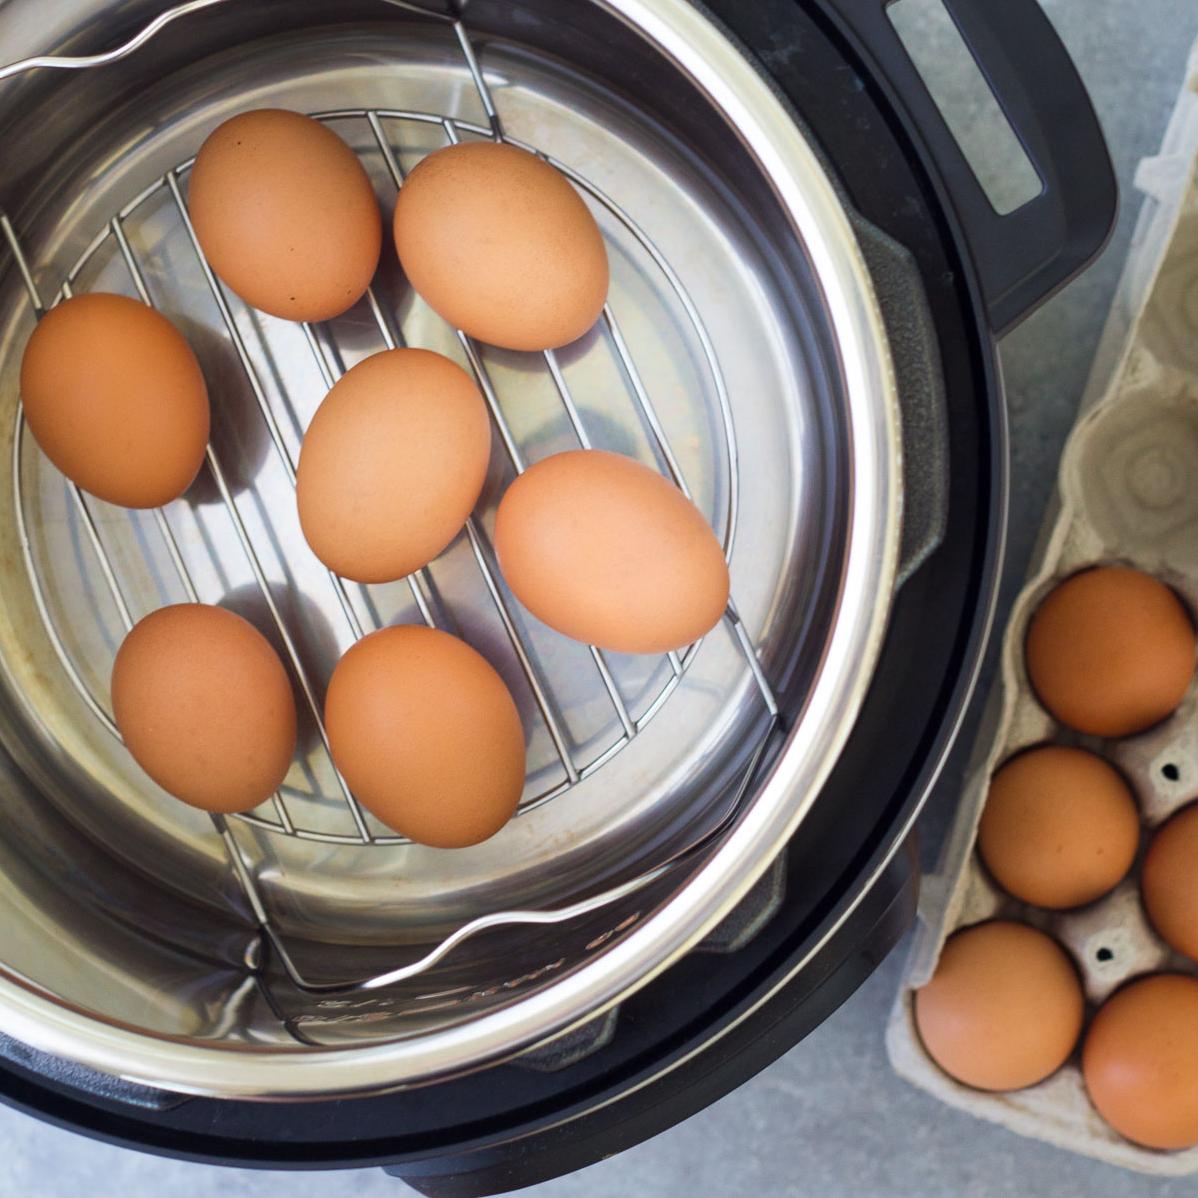  The easiest boiled eggs you'll ever make thanks to this Instant Pot recipe